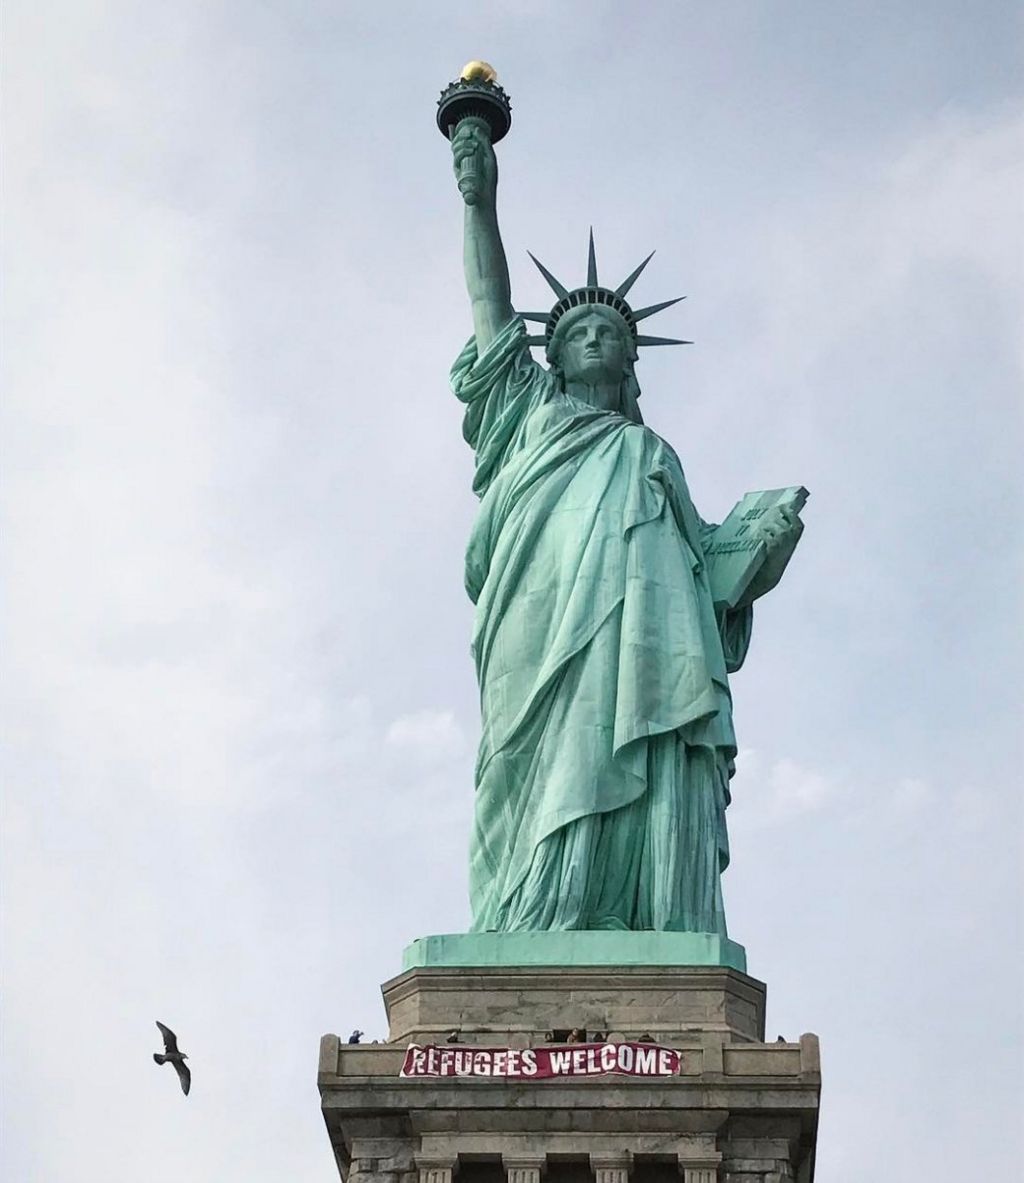 A giant banner saying "Refugees Welcome" hangs on the pedestal of the Statue of Liberty, New York, 21 February 2017